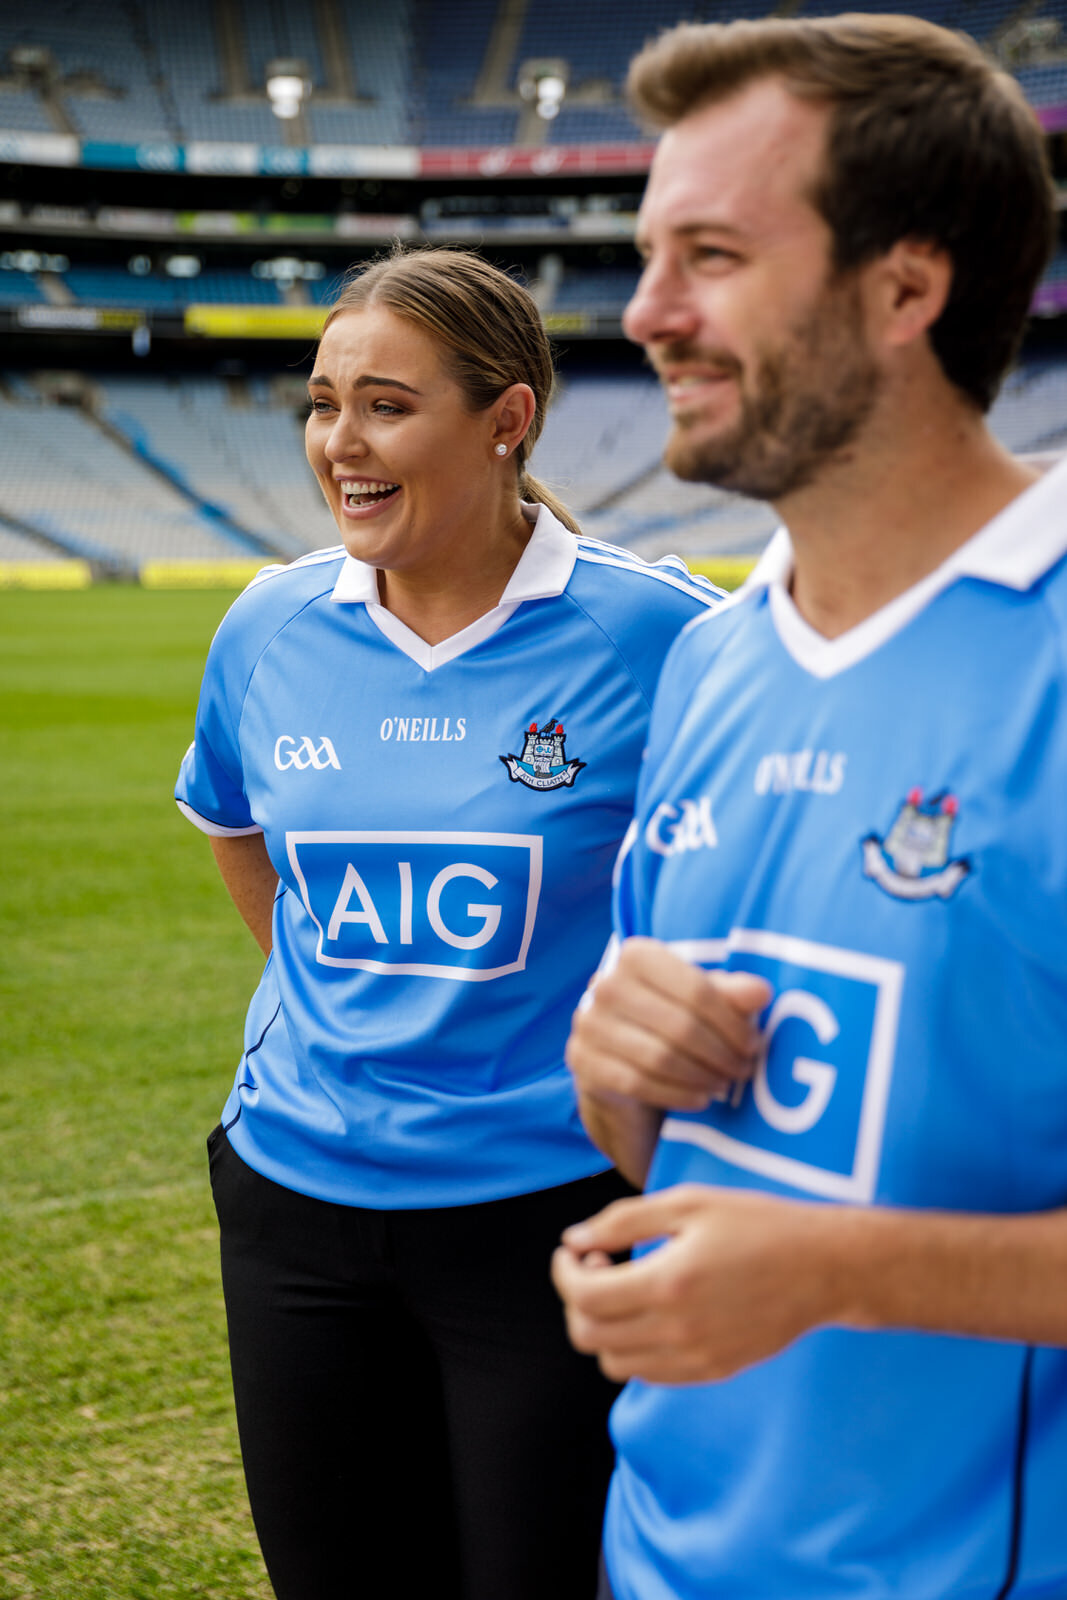  Croke Park Meetings and Events corporate headshots by photographer Roger Kenny. 